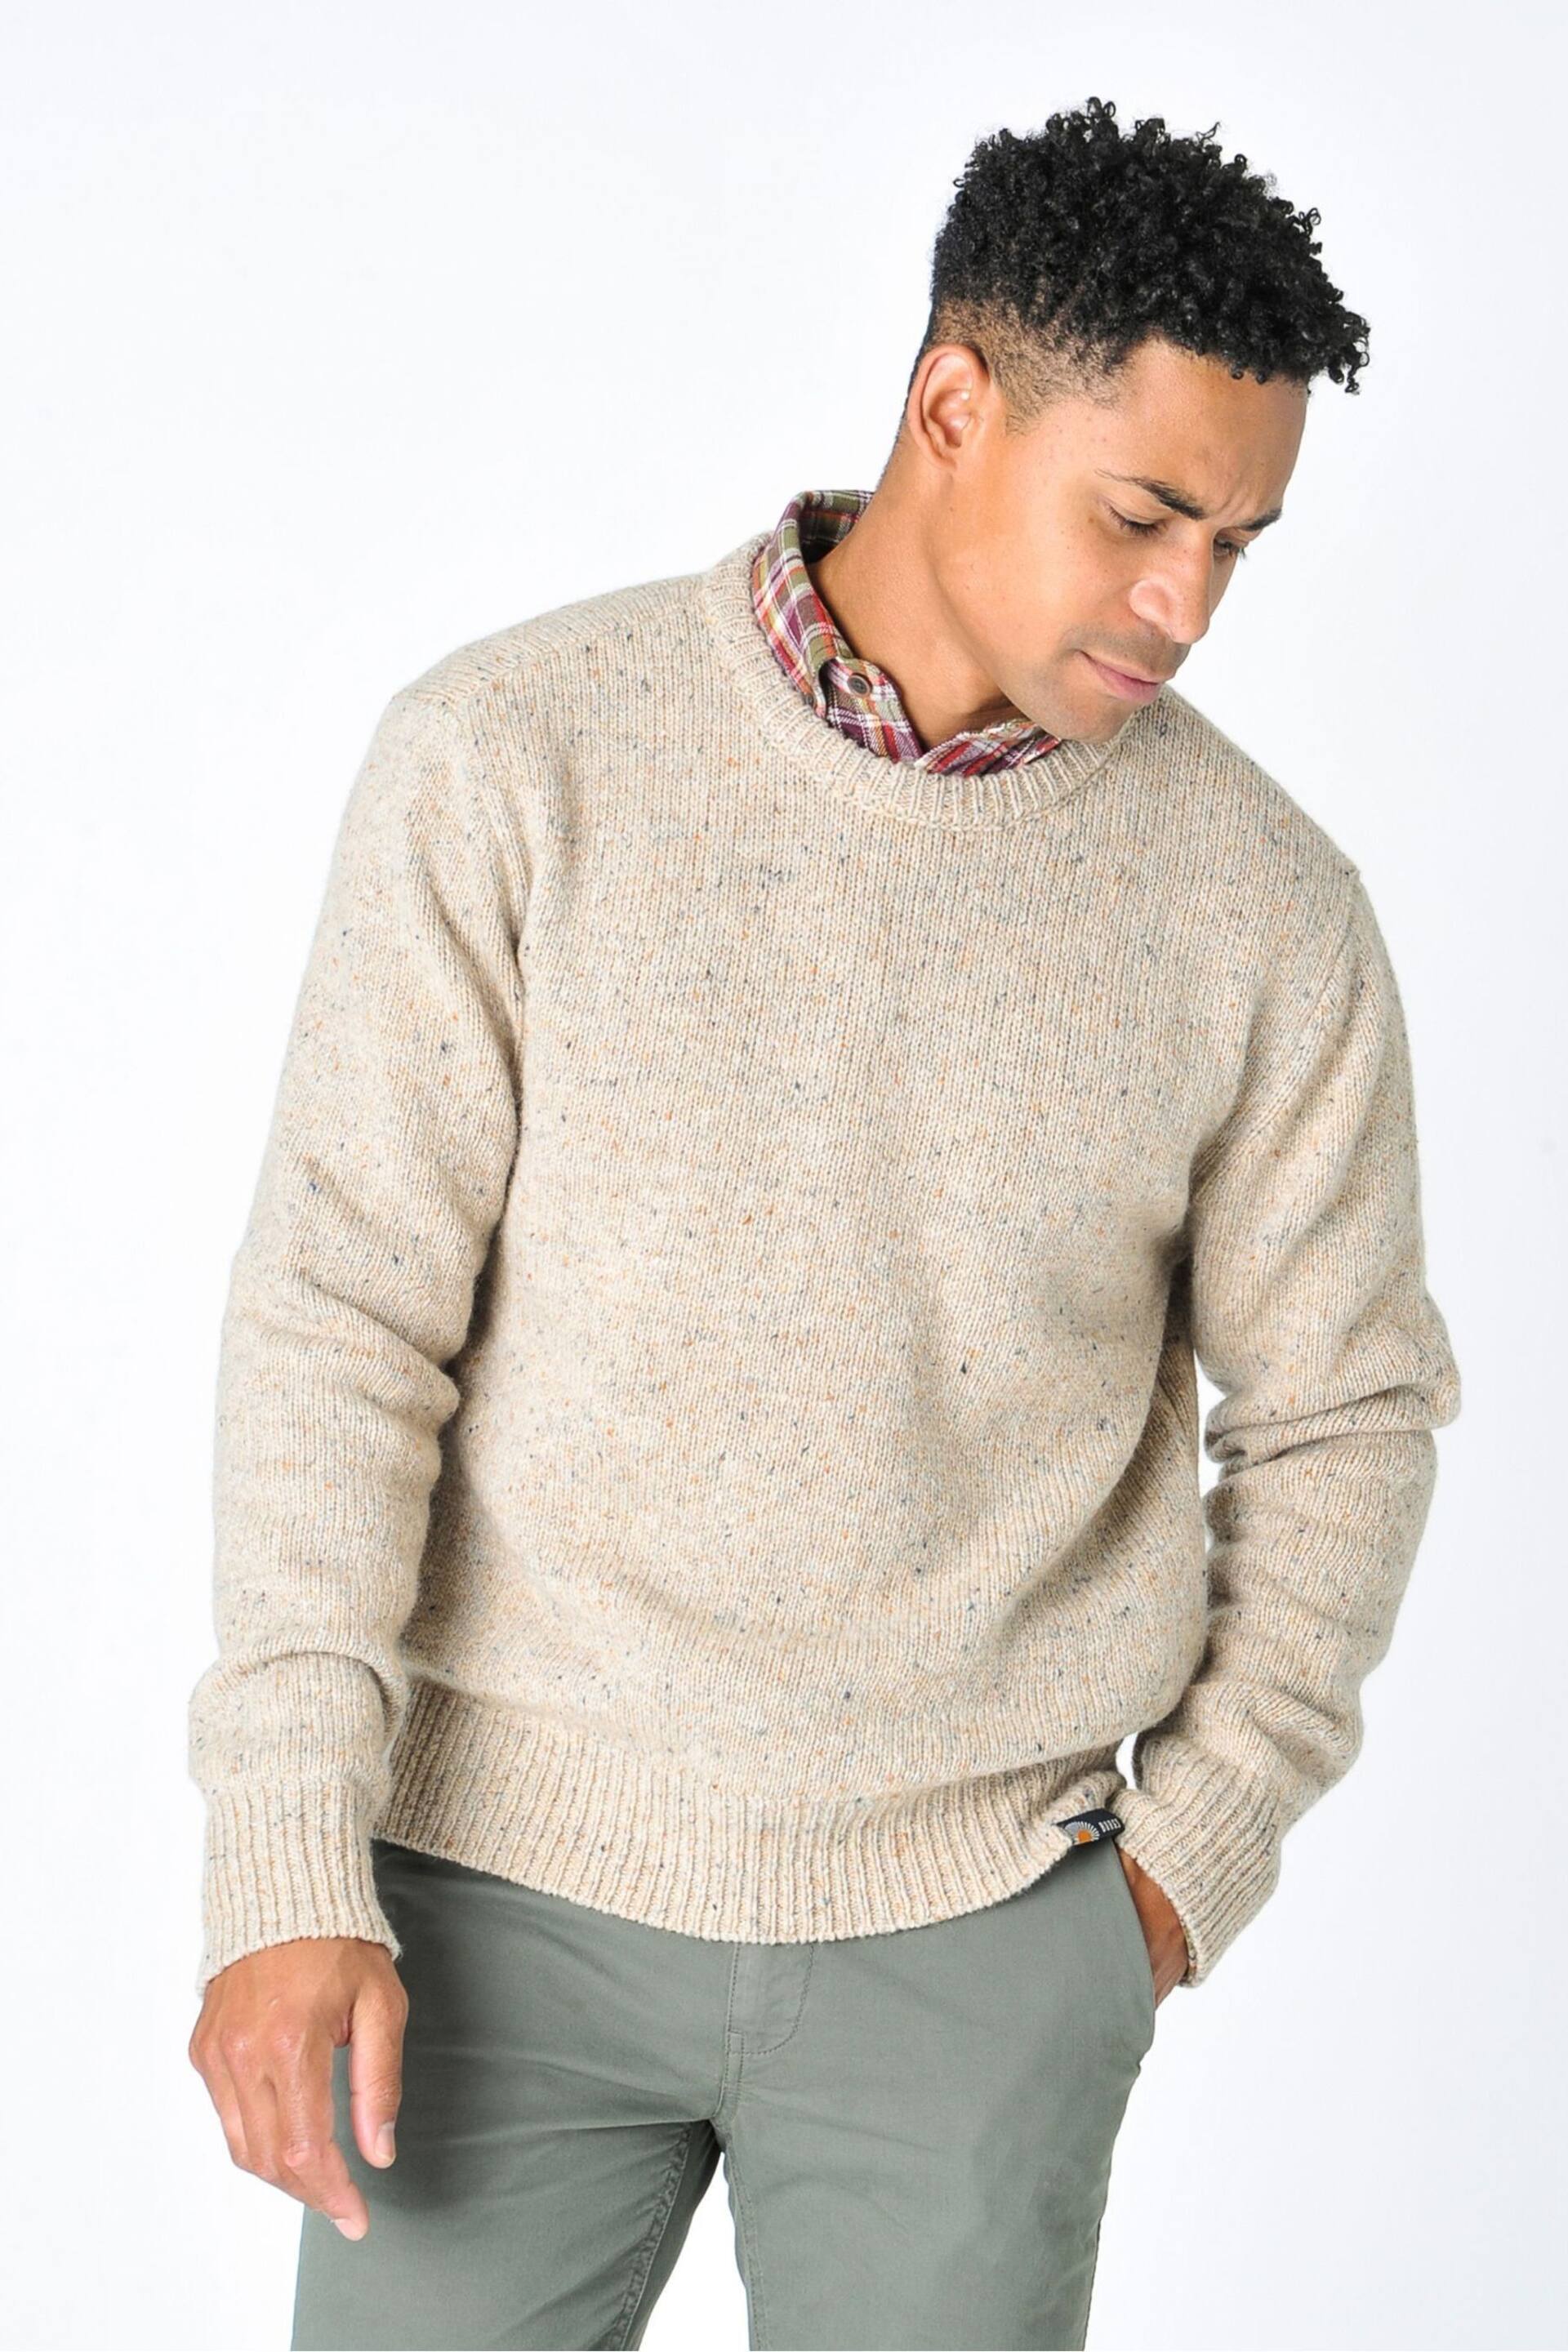 Burgs Mornick Mens Rich Neppy Knit Crew Neck Jumper - Image 2 of 6